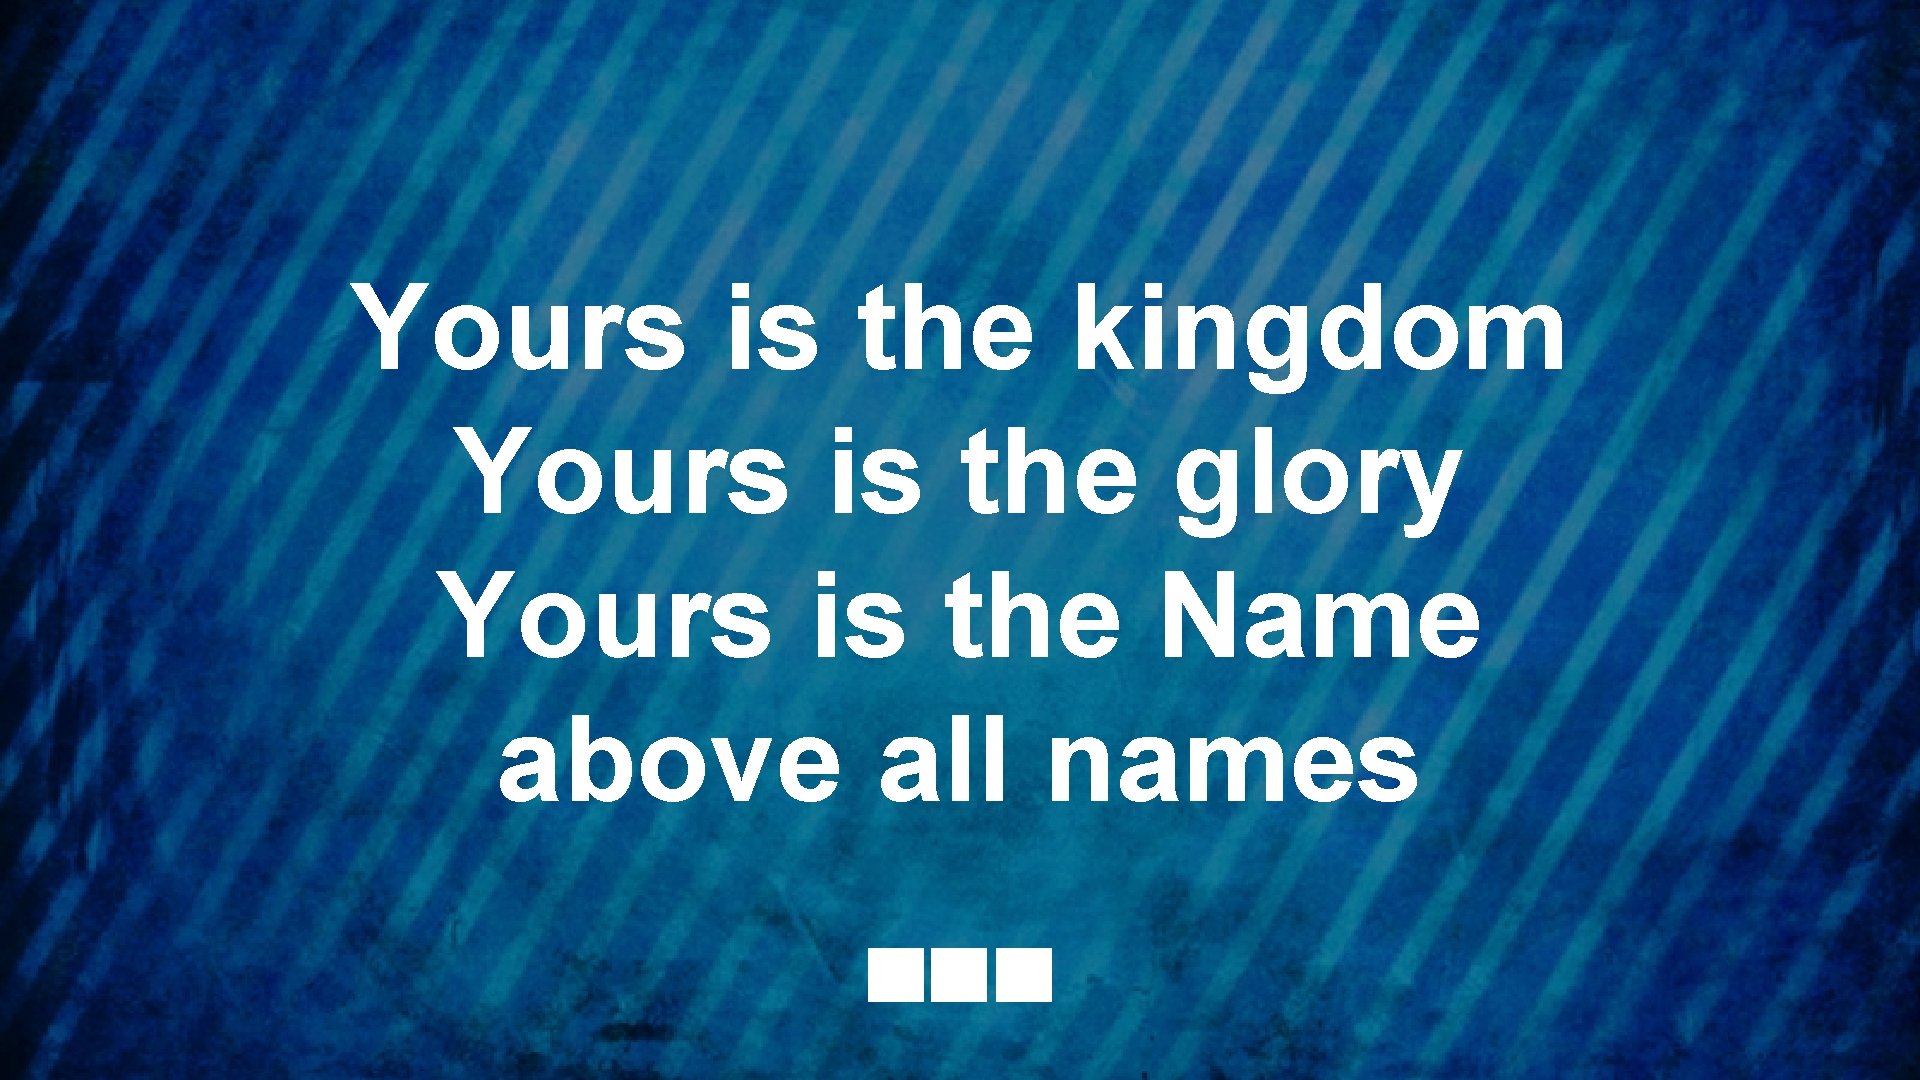 Yours is the kingdom Yours is the glory Yours is the Name above all